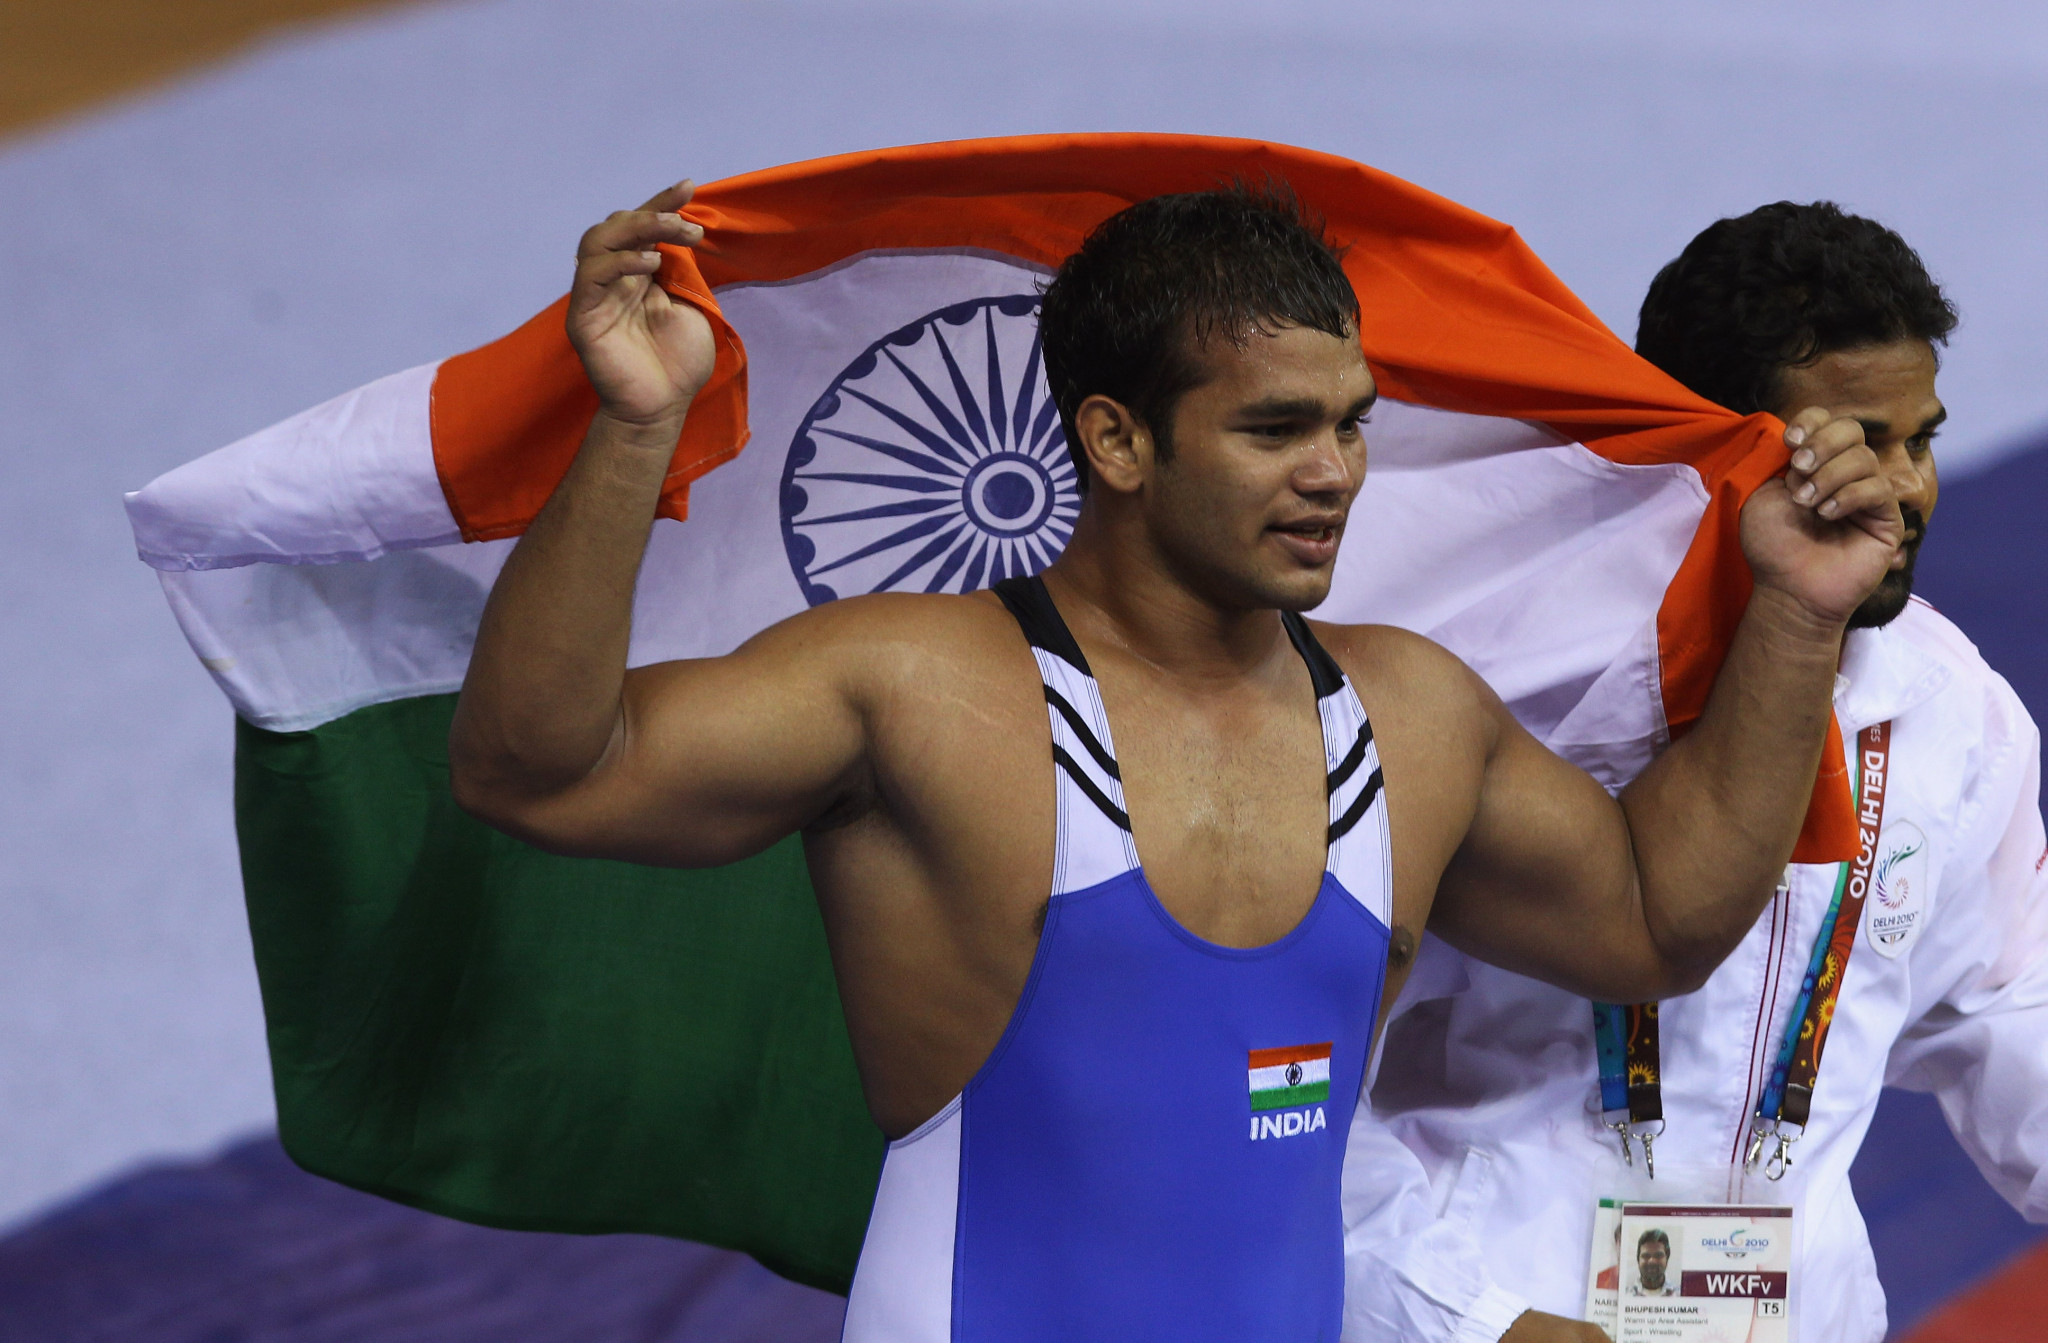 Indian wrestler Yadav aims for Tokyo 2020 redemption after doping ban